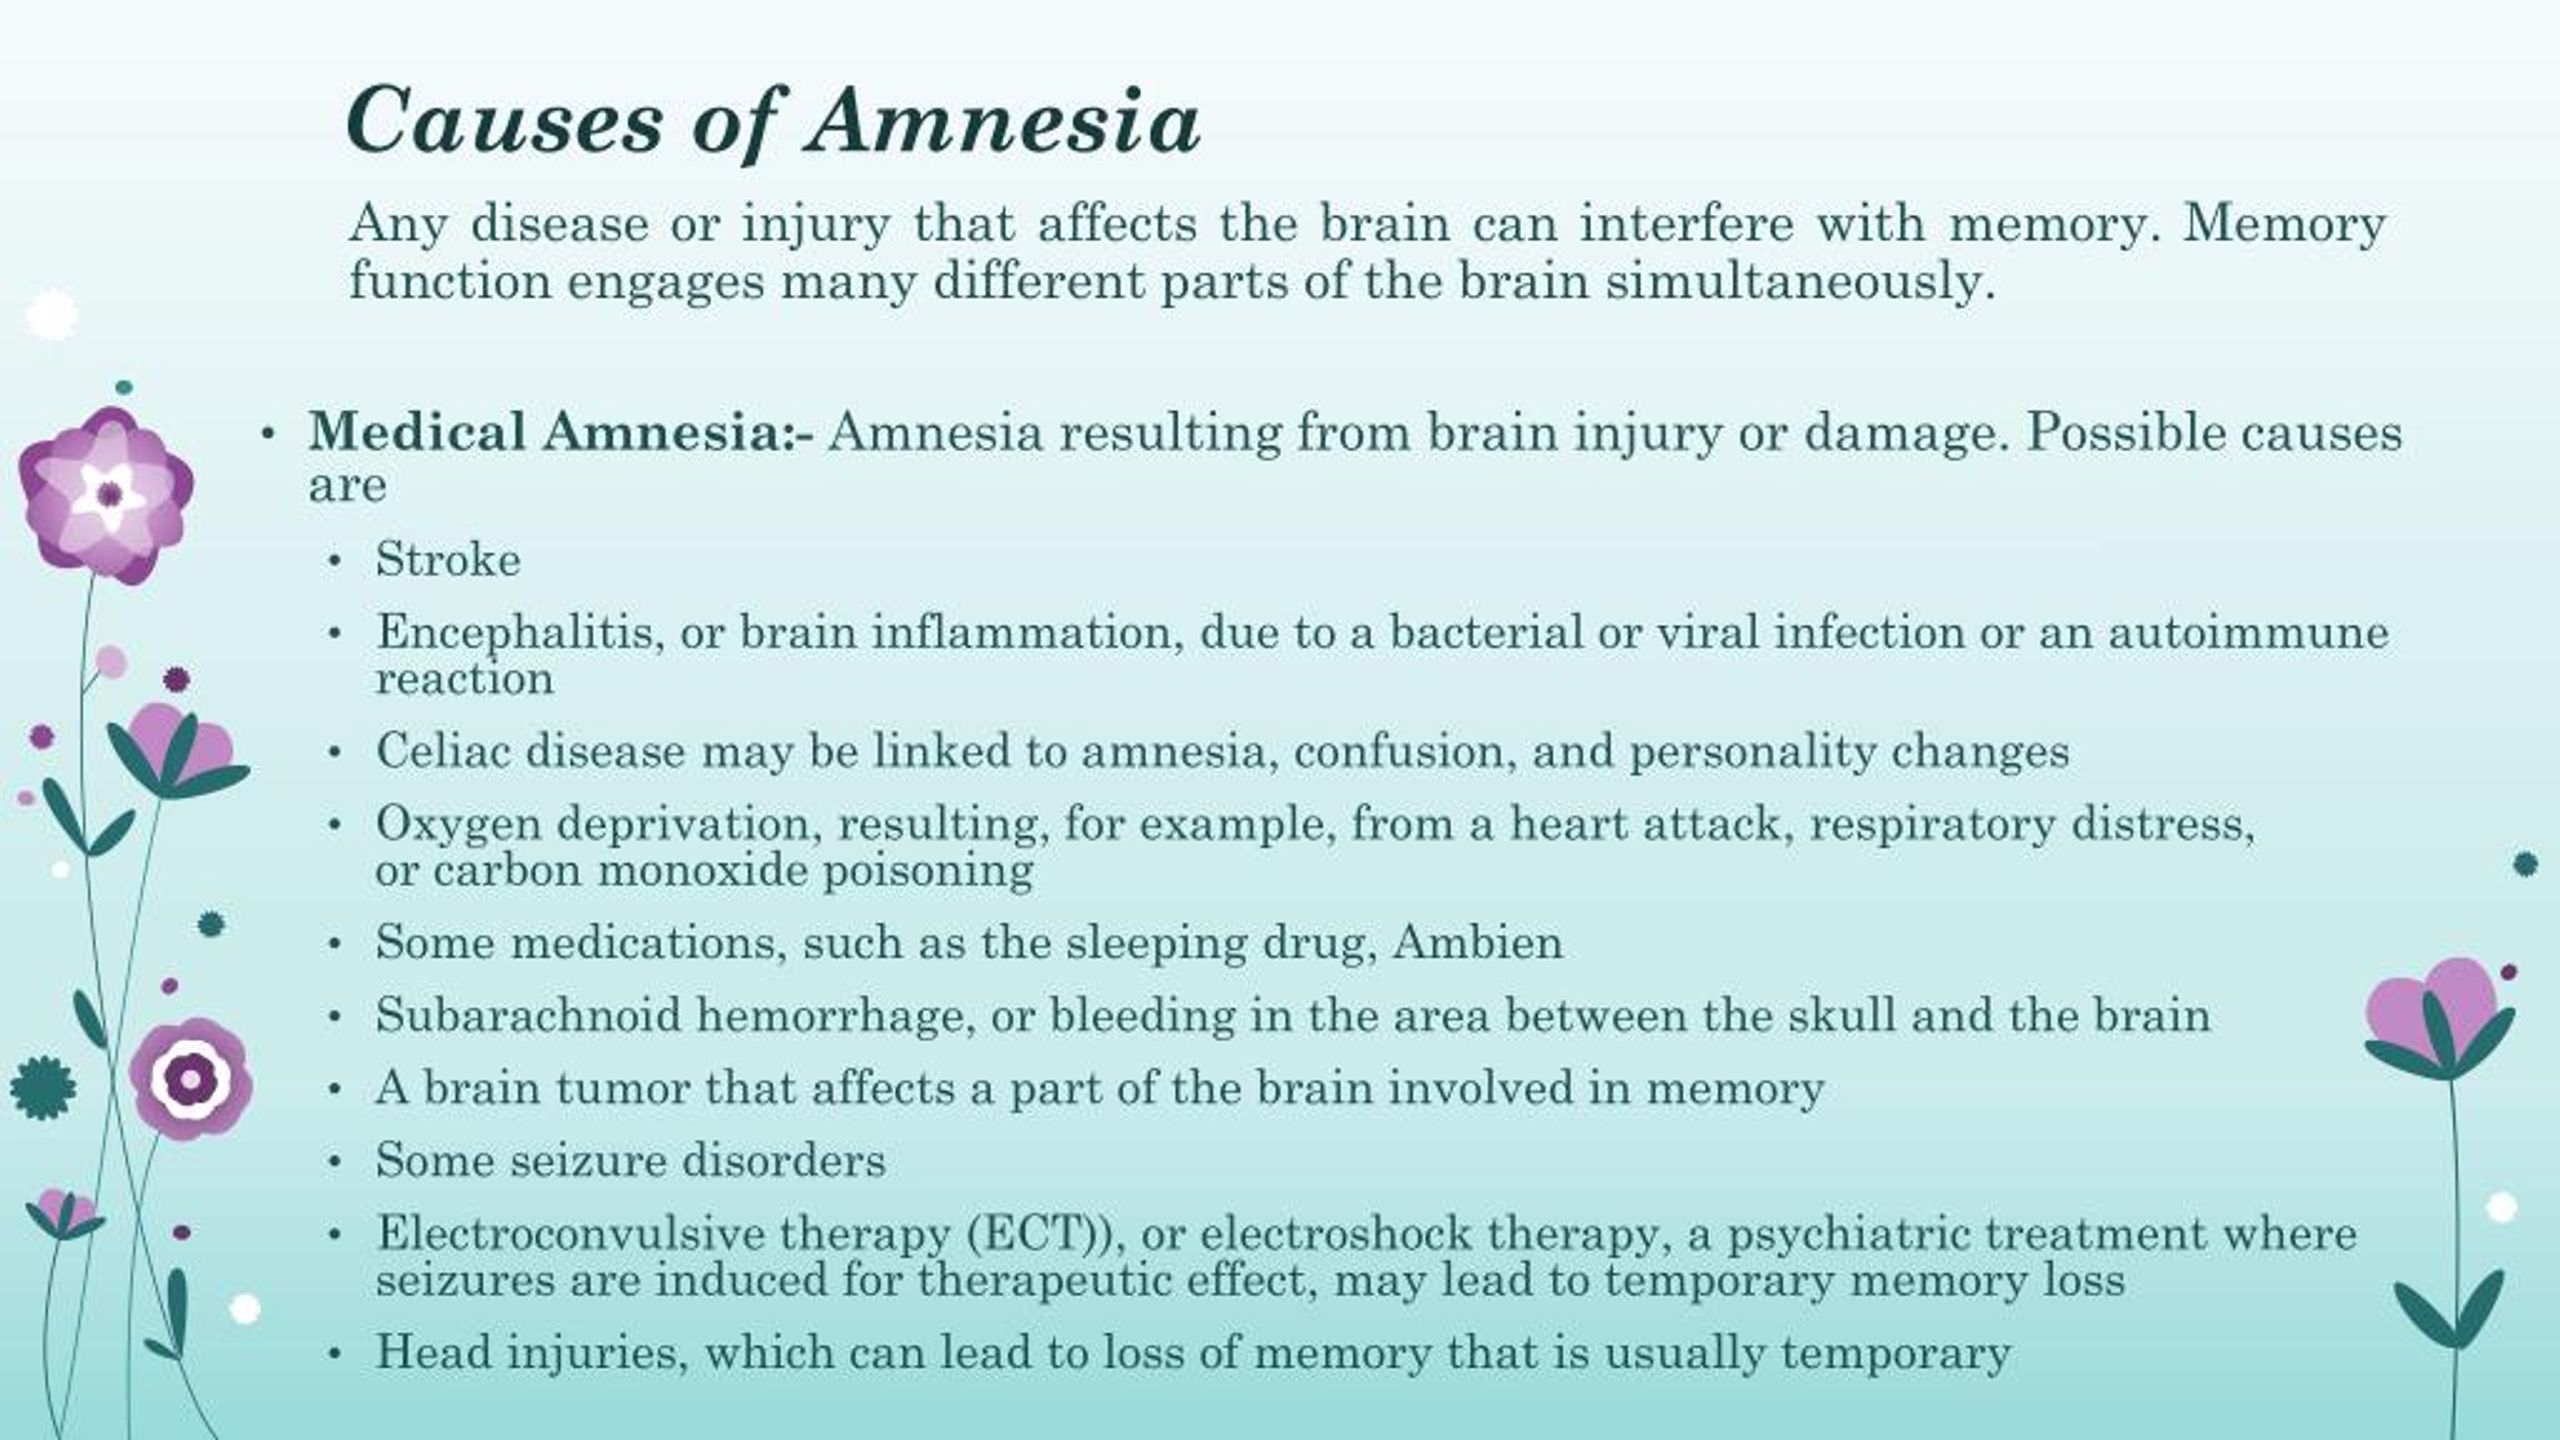 two different types of amnesia